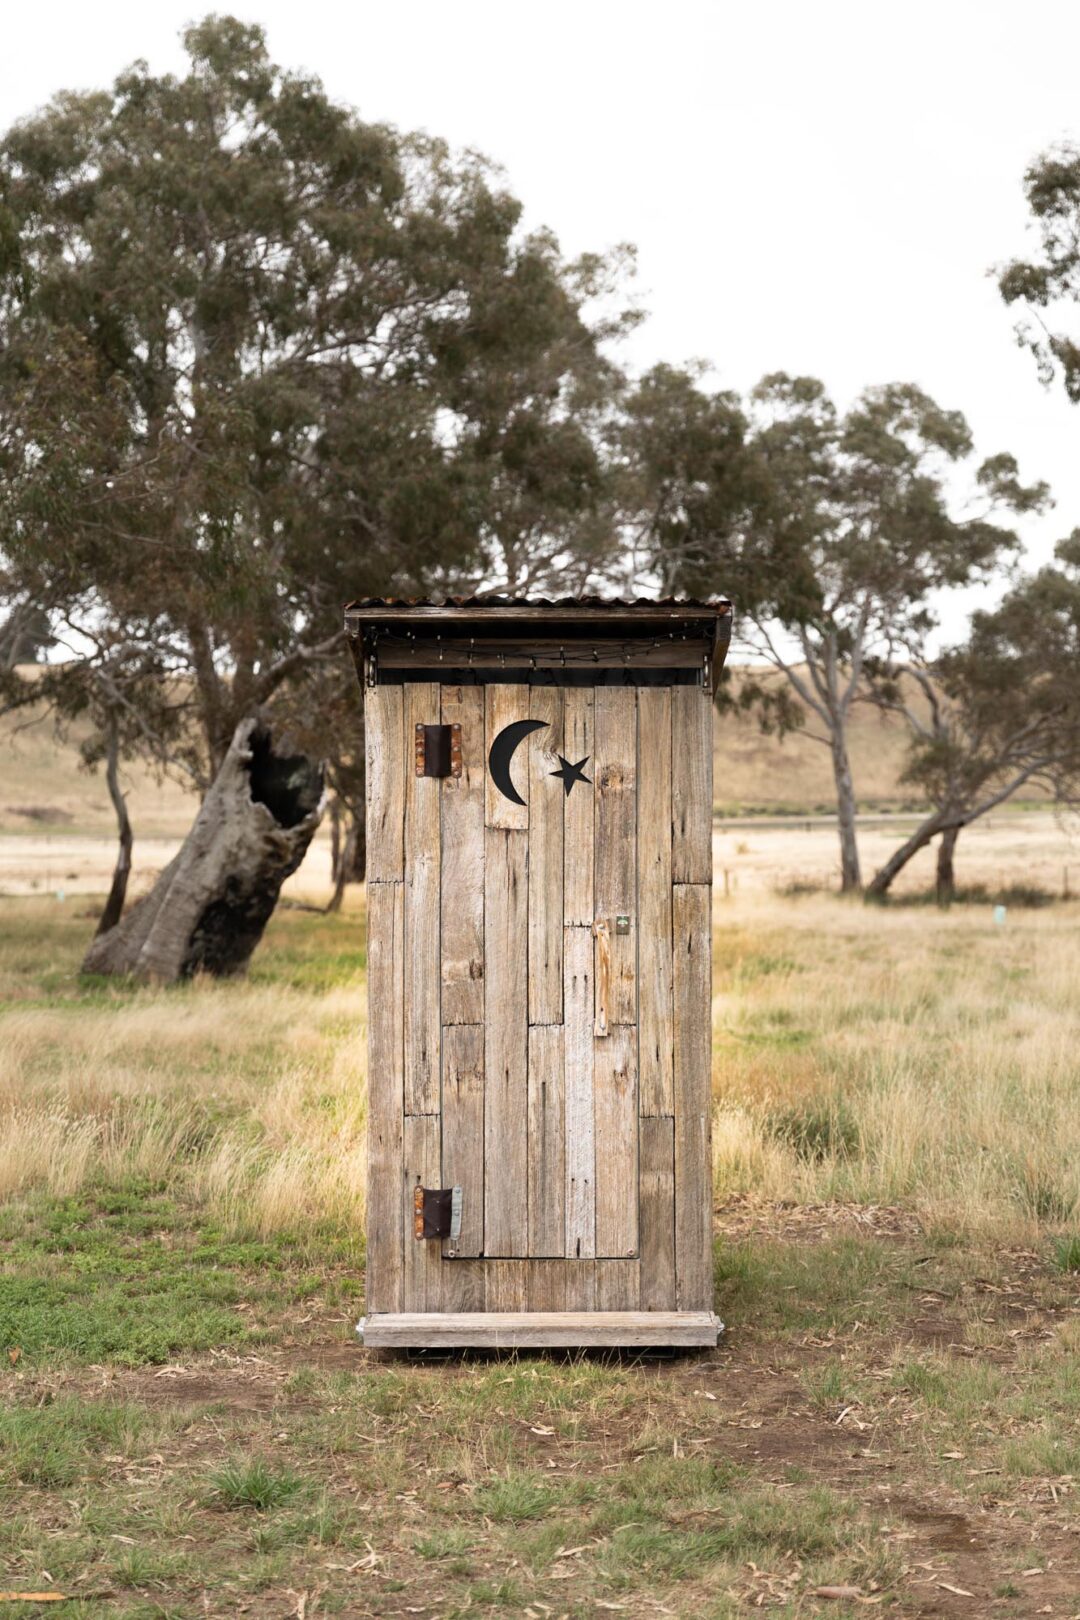 Outhouse Toilet Paddock Dreams (15)